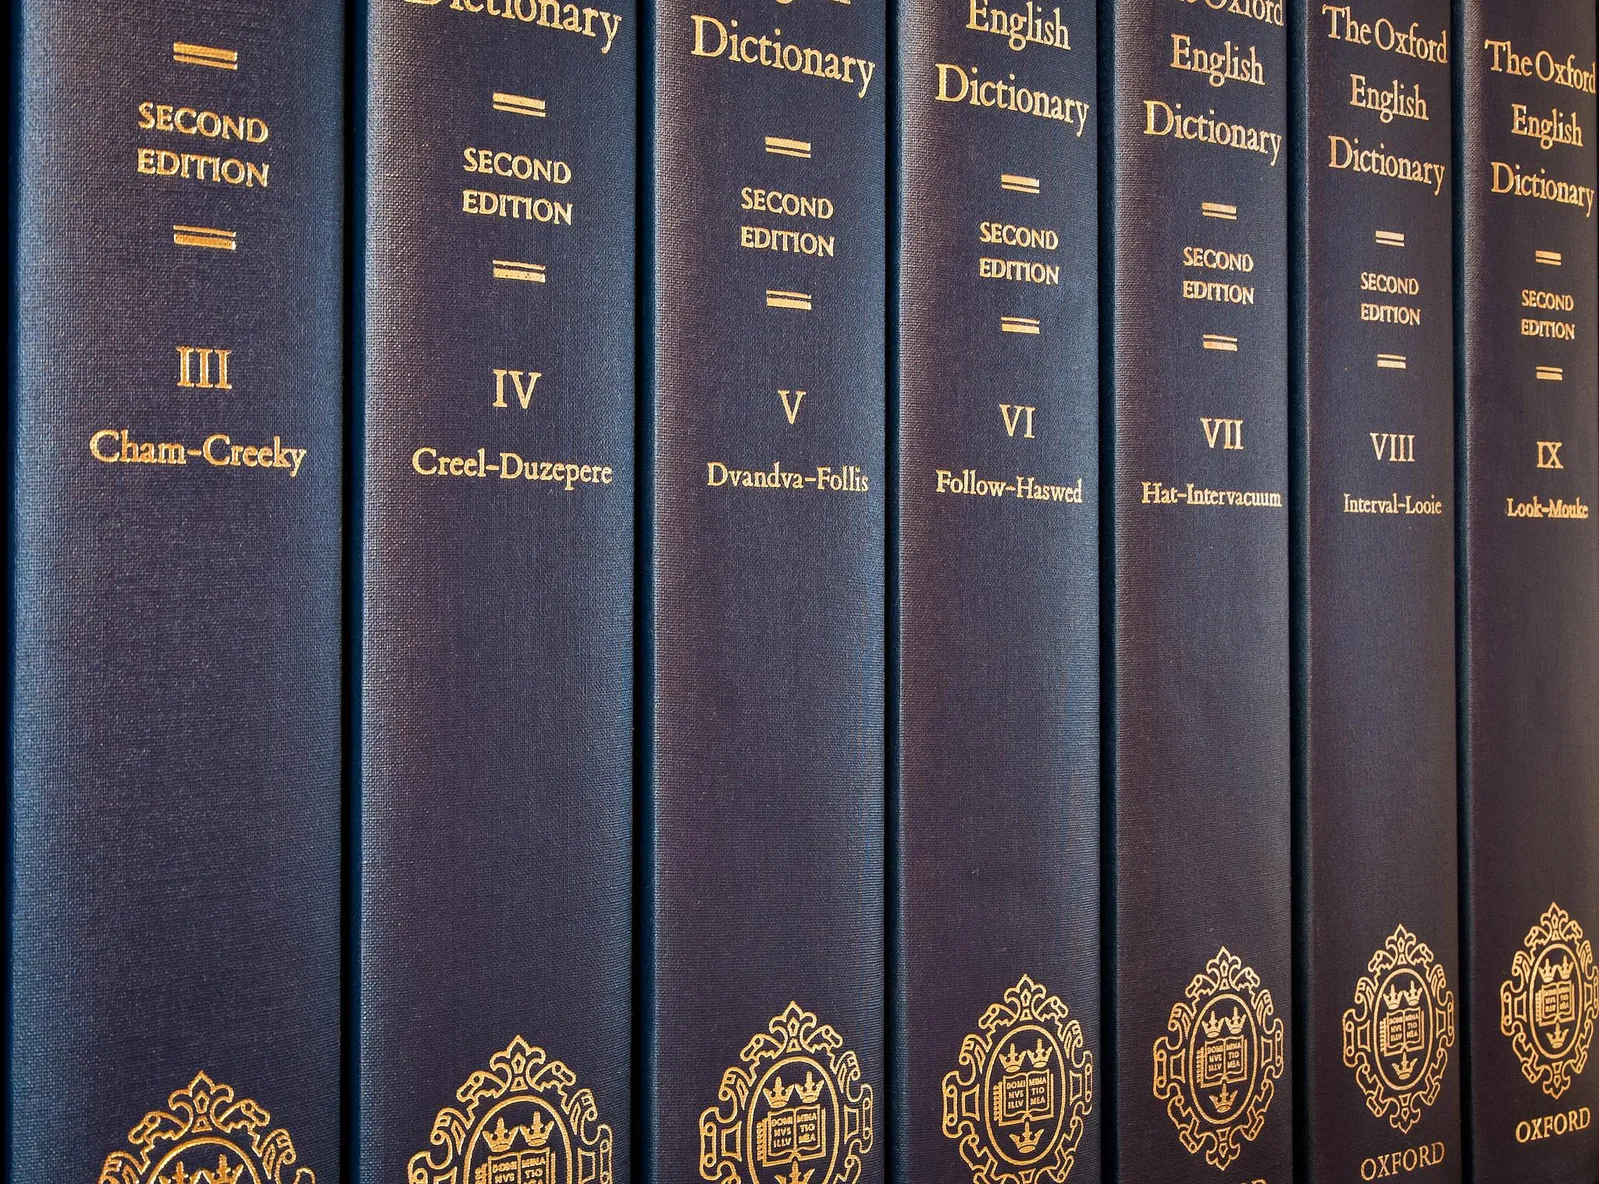 The Oxford English Dictionary: its editors and its history - New